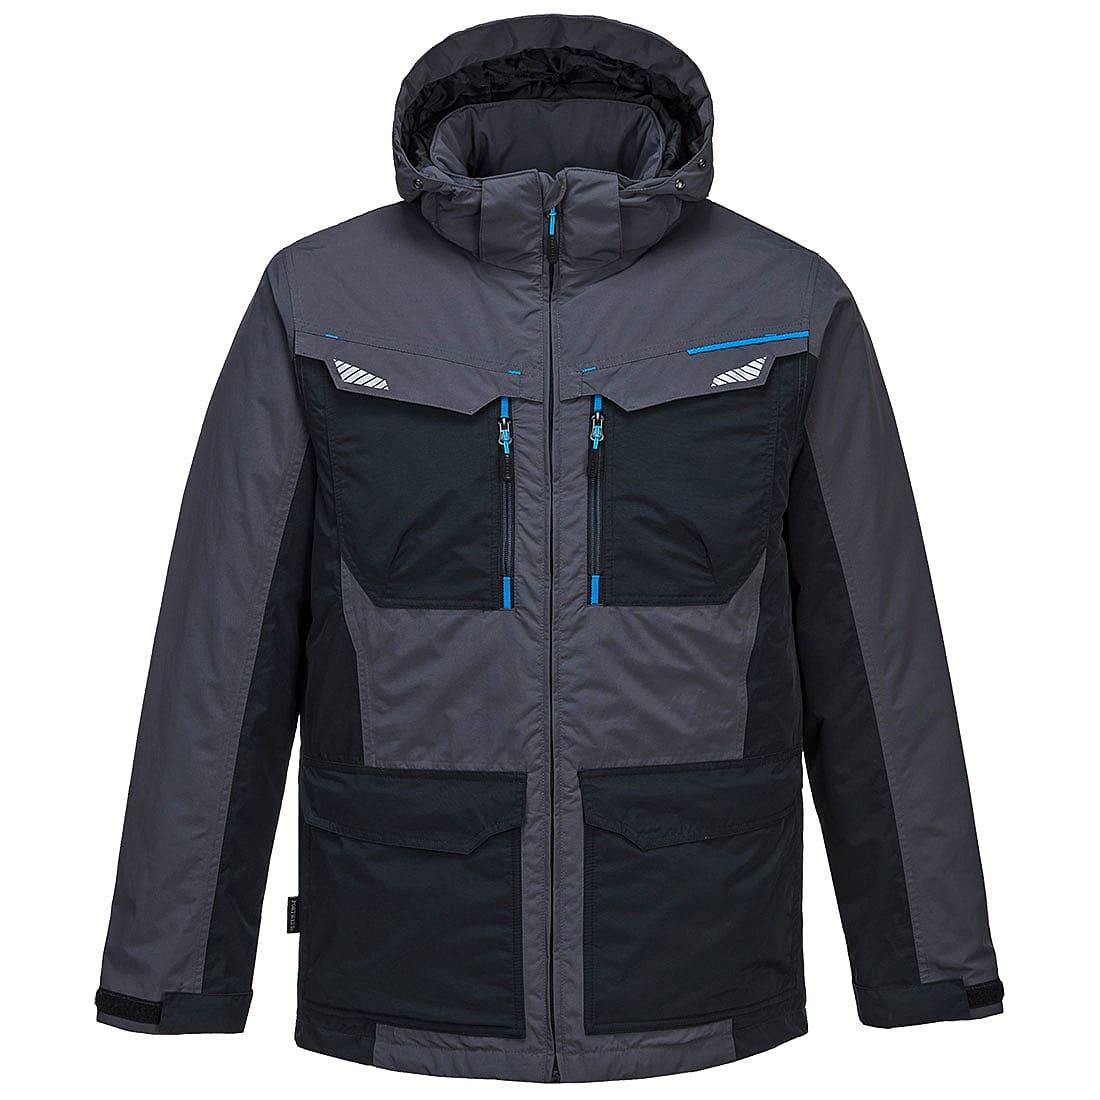 Portwest WX3 Winter Jacket in Metal Grey (Product Code: T740)